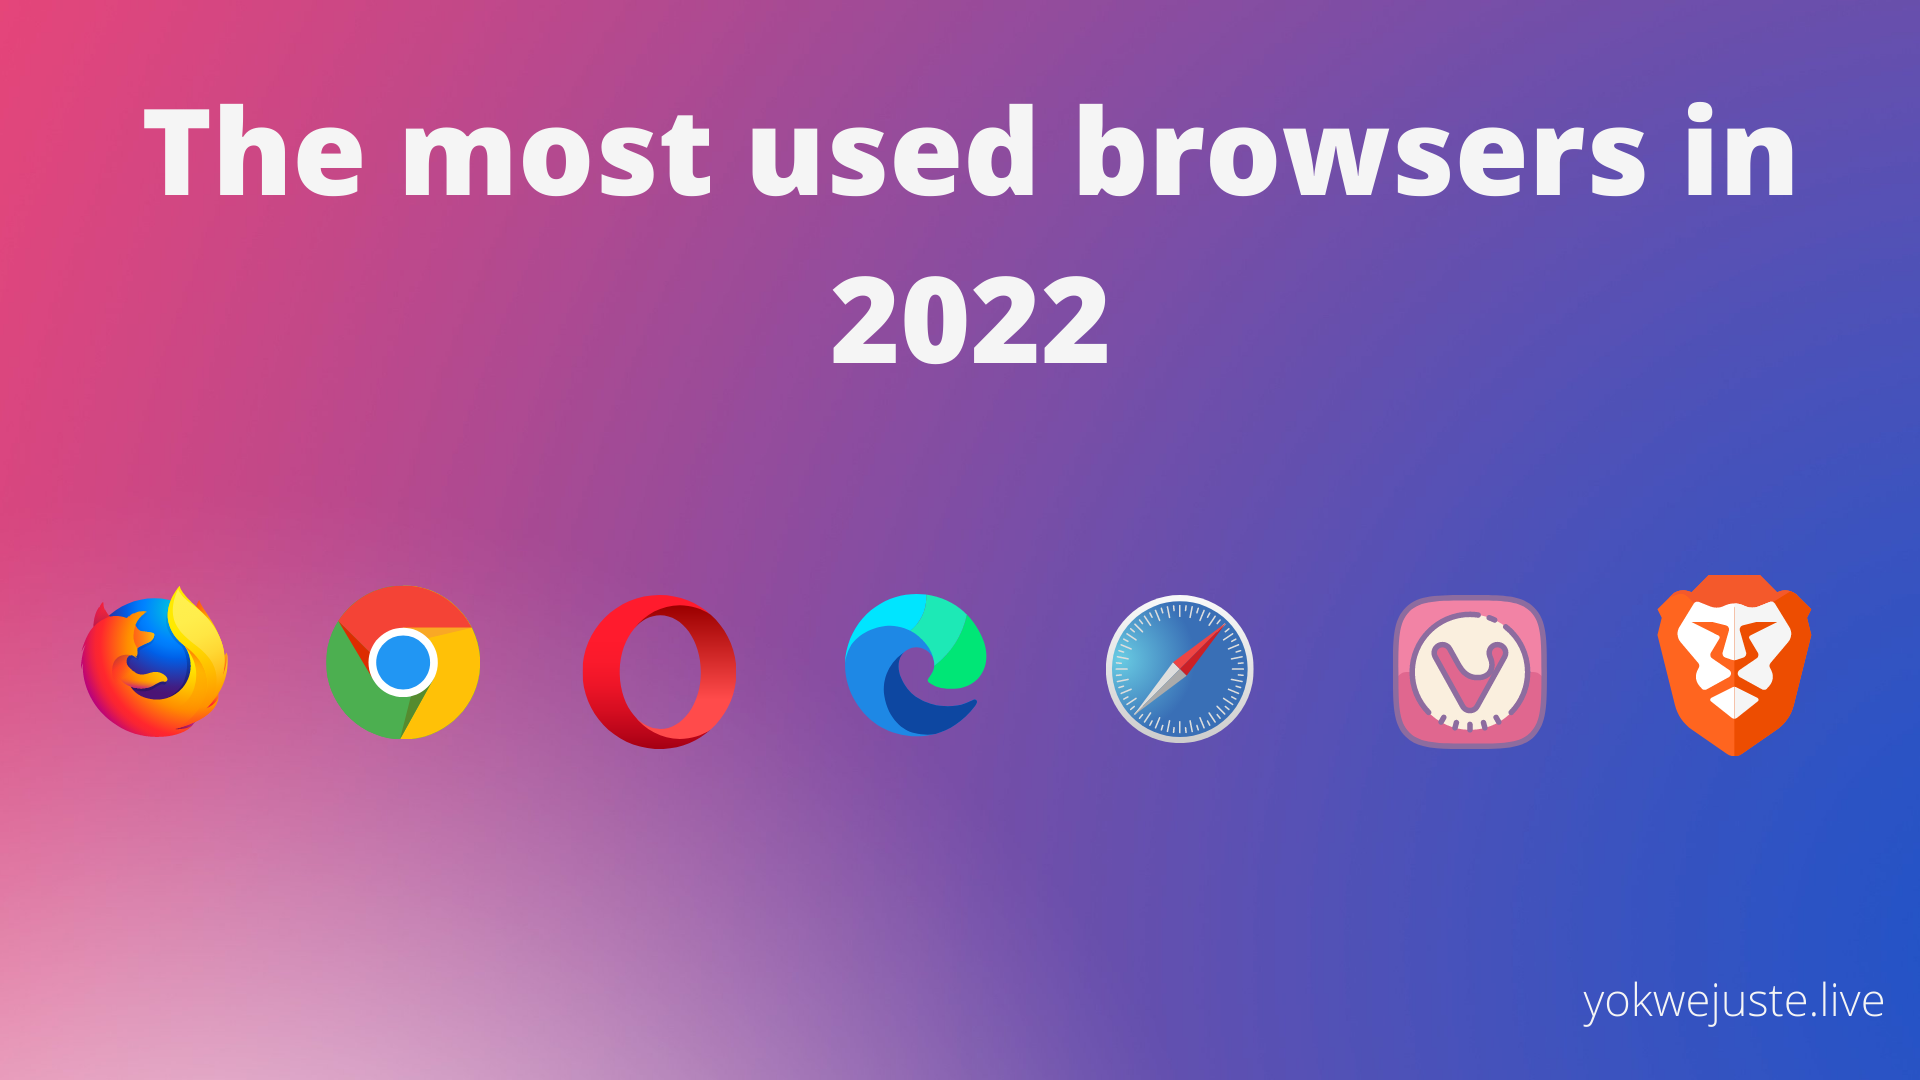 The most used browsers in 2022